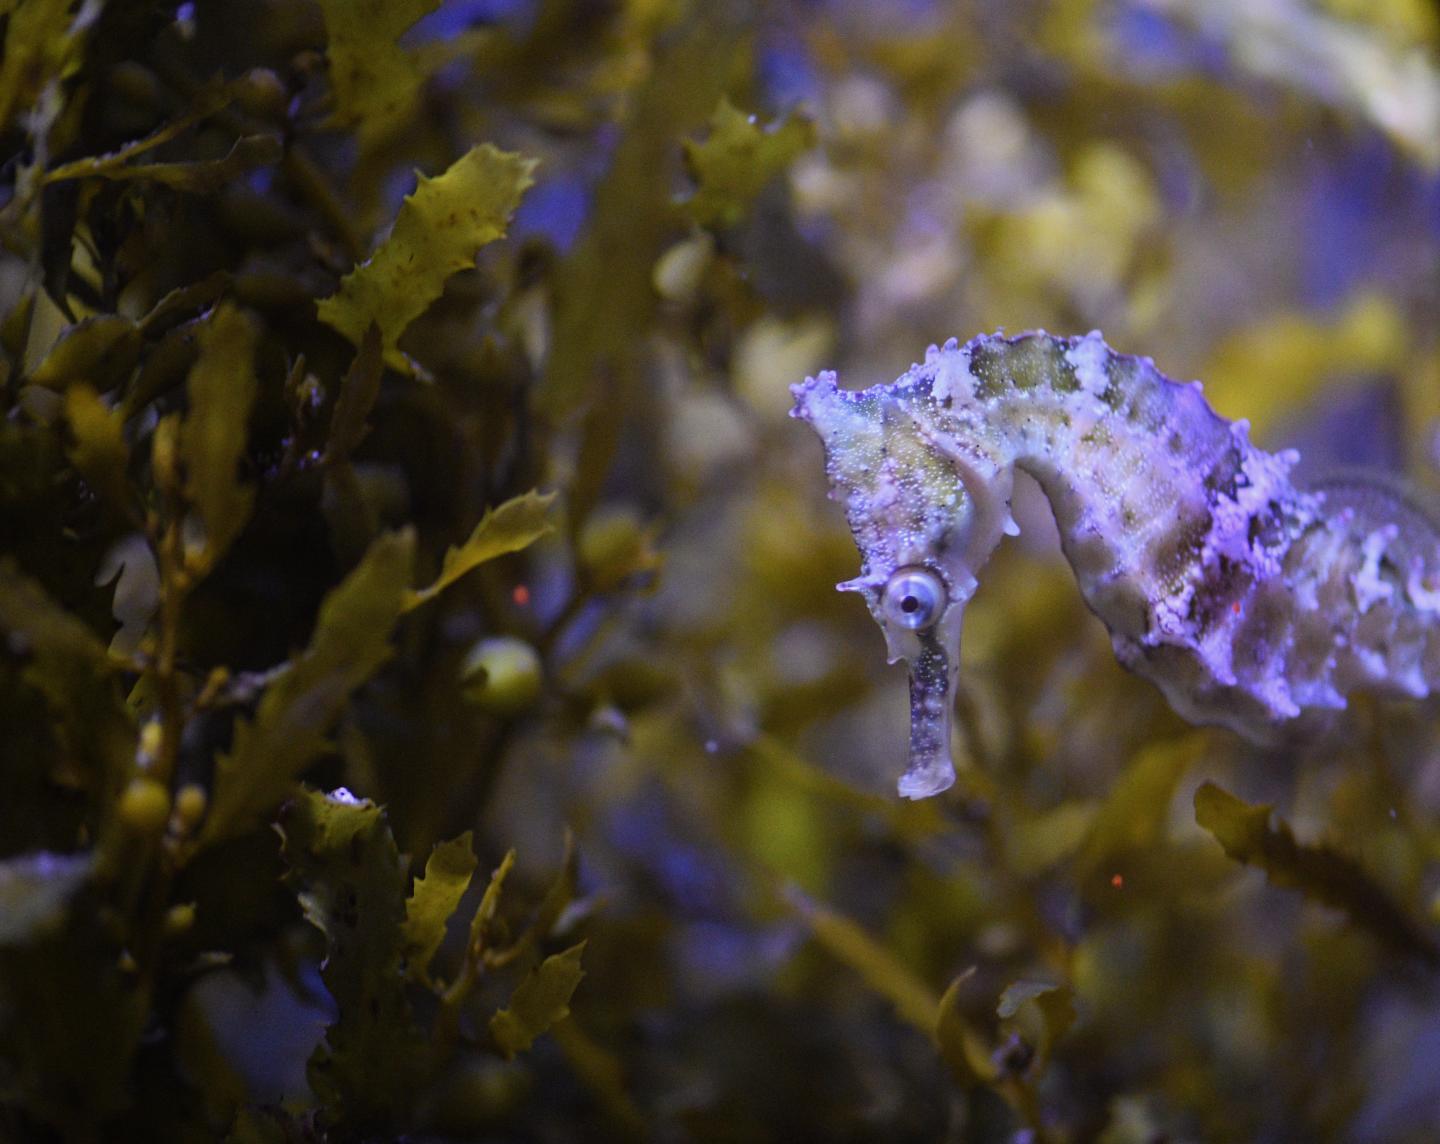 Adult White's Seahorse